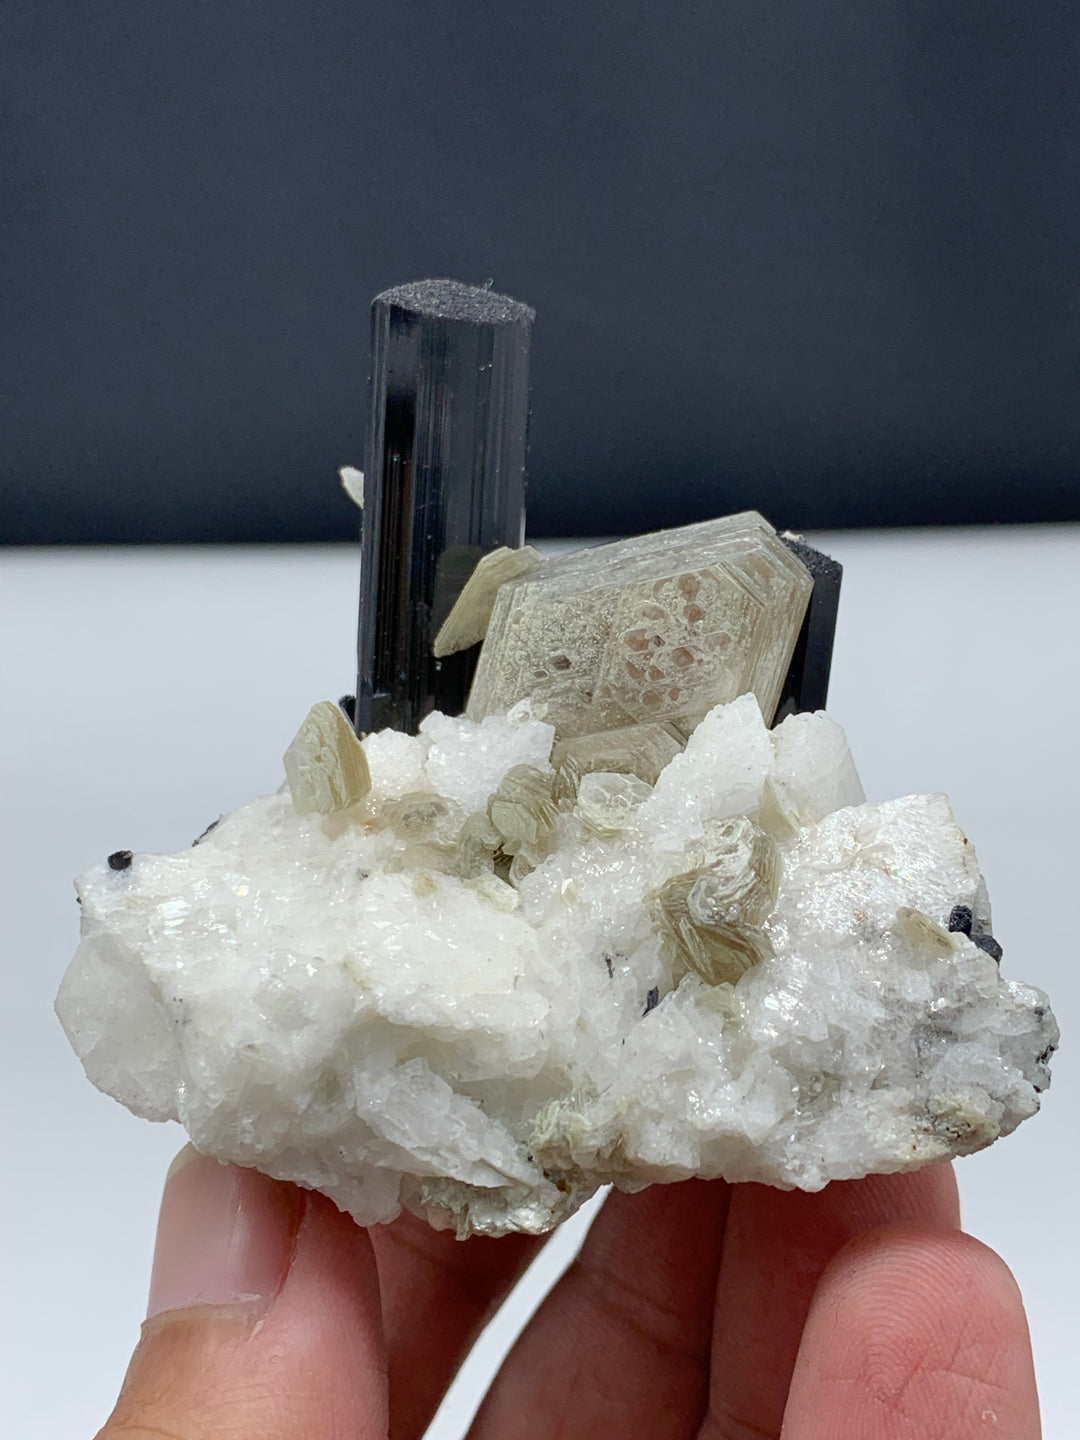 102.07 Grams Mesmerizing Black Tourmaline Specimen Attached With Muscovite